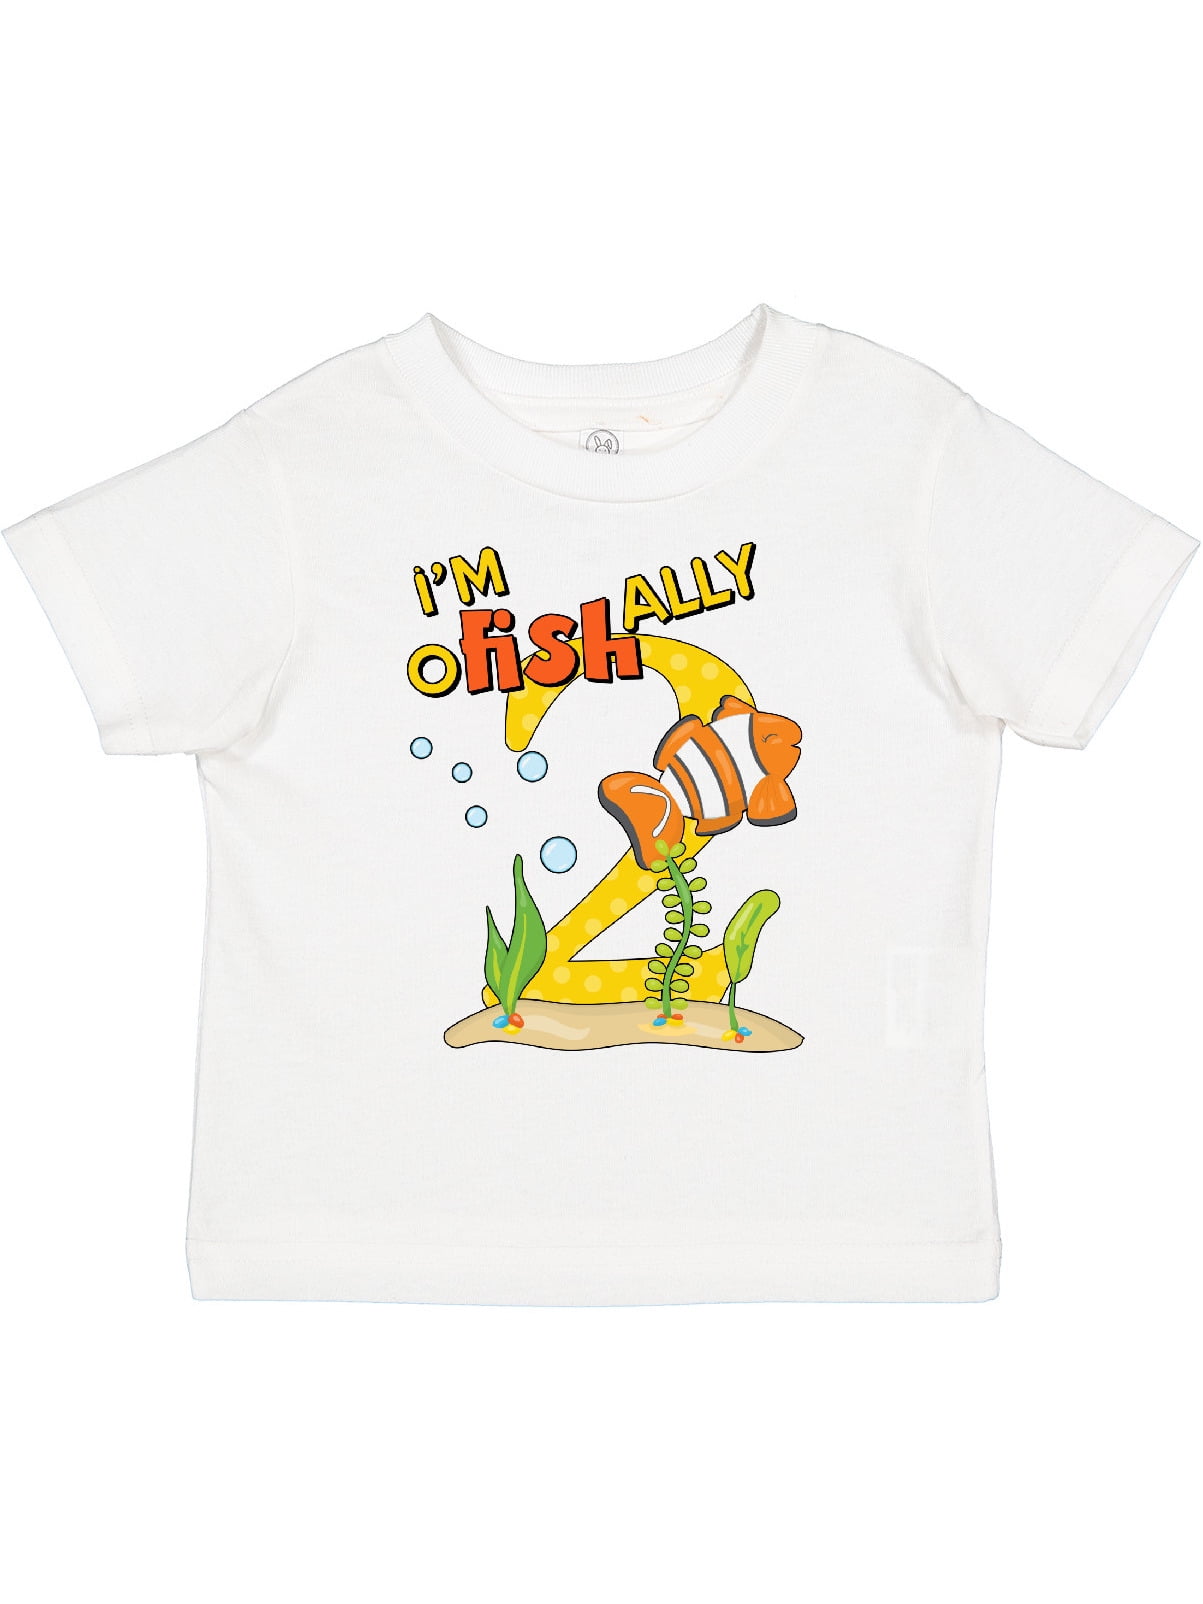 Birthday　Second　I'm　Clownfish　Toddler　Two-　Boy　Inktastic　T-Shirt　Toddler　Gift　O-Fish-Ally　or　Cute　Girl